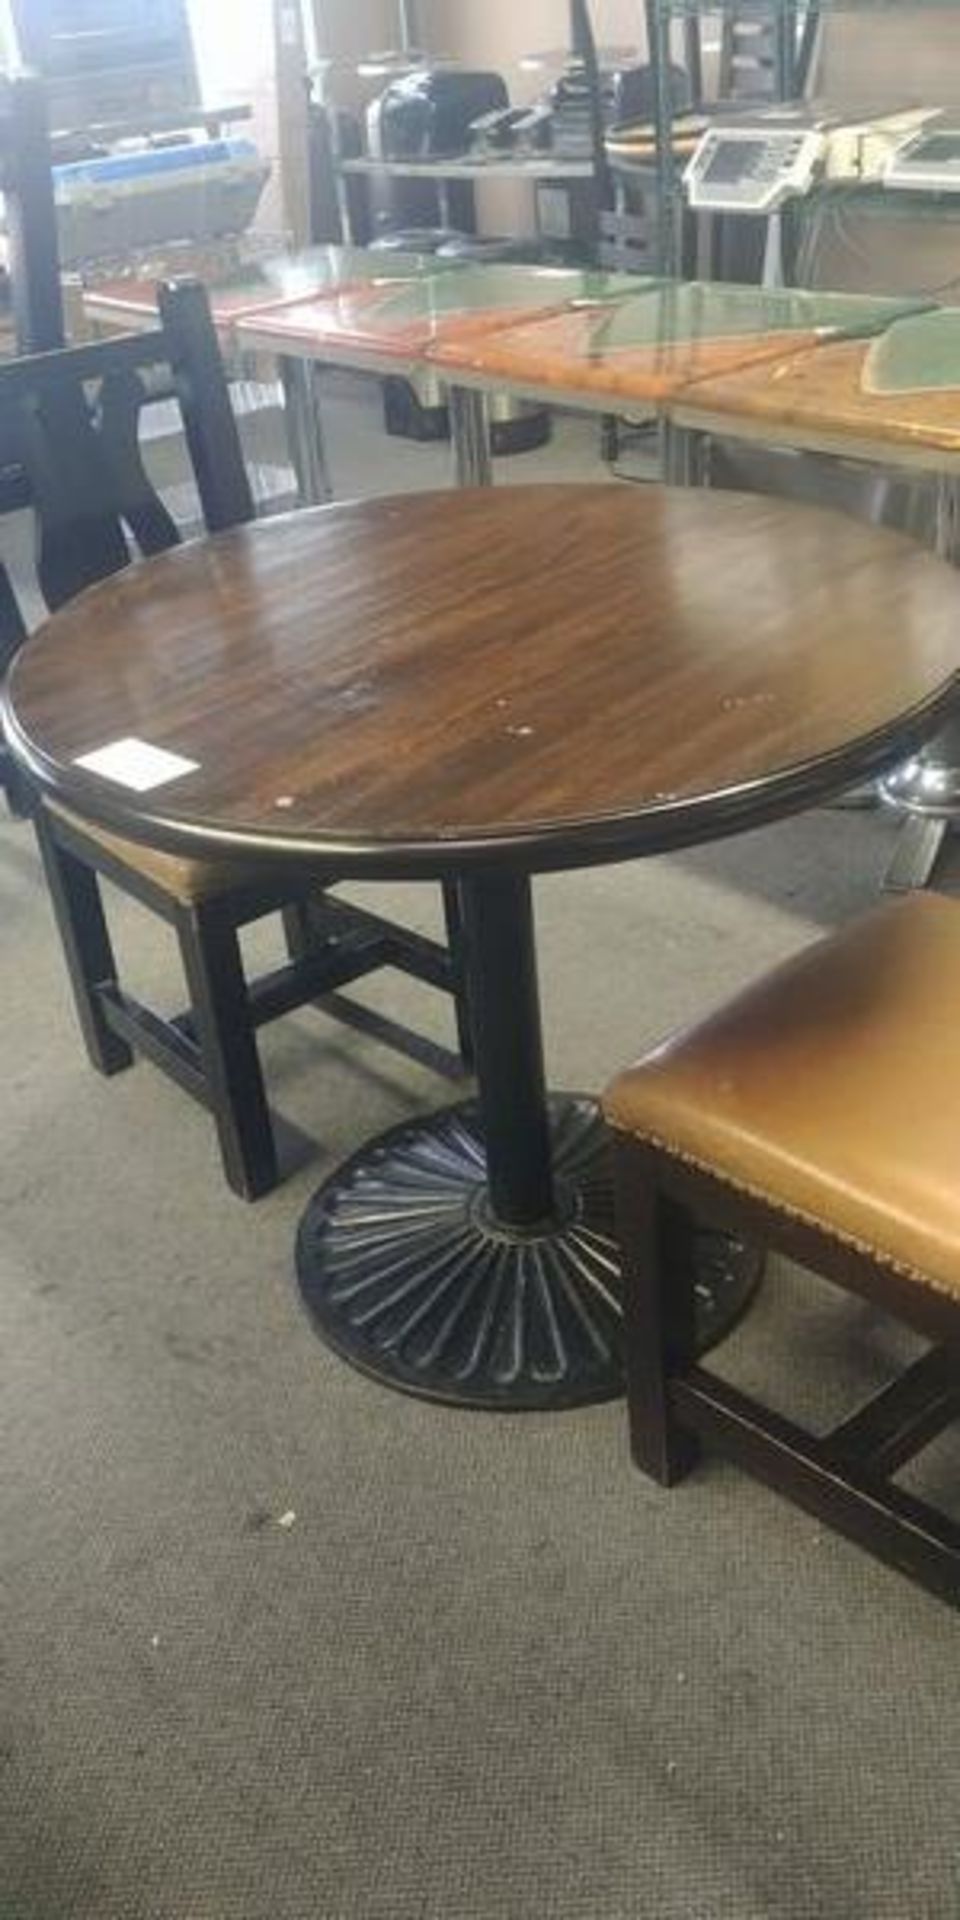 3 - 36" Round Mahogany Top Table with Cast Iron Base - Price Each Times 3